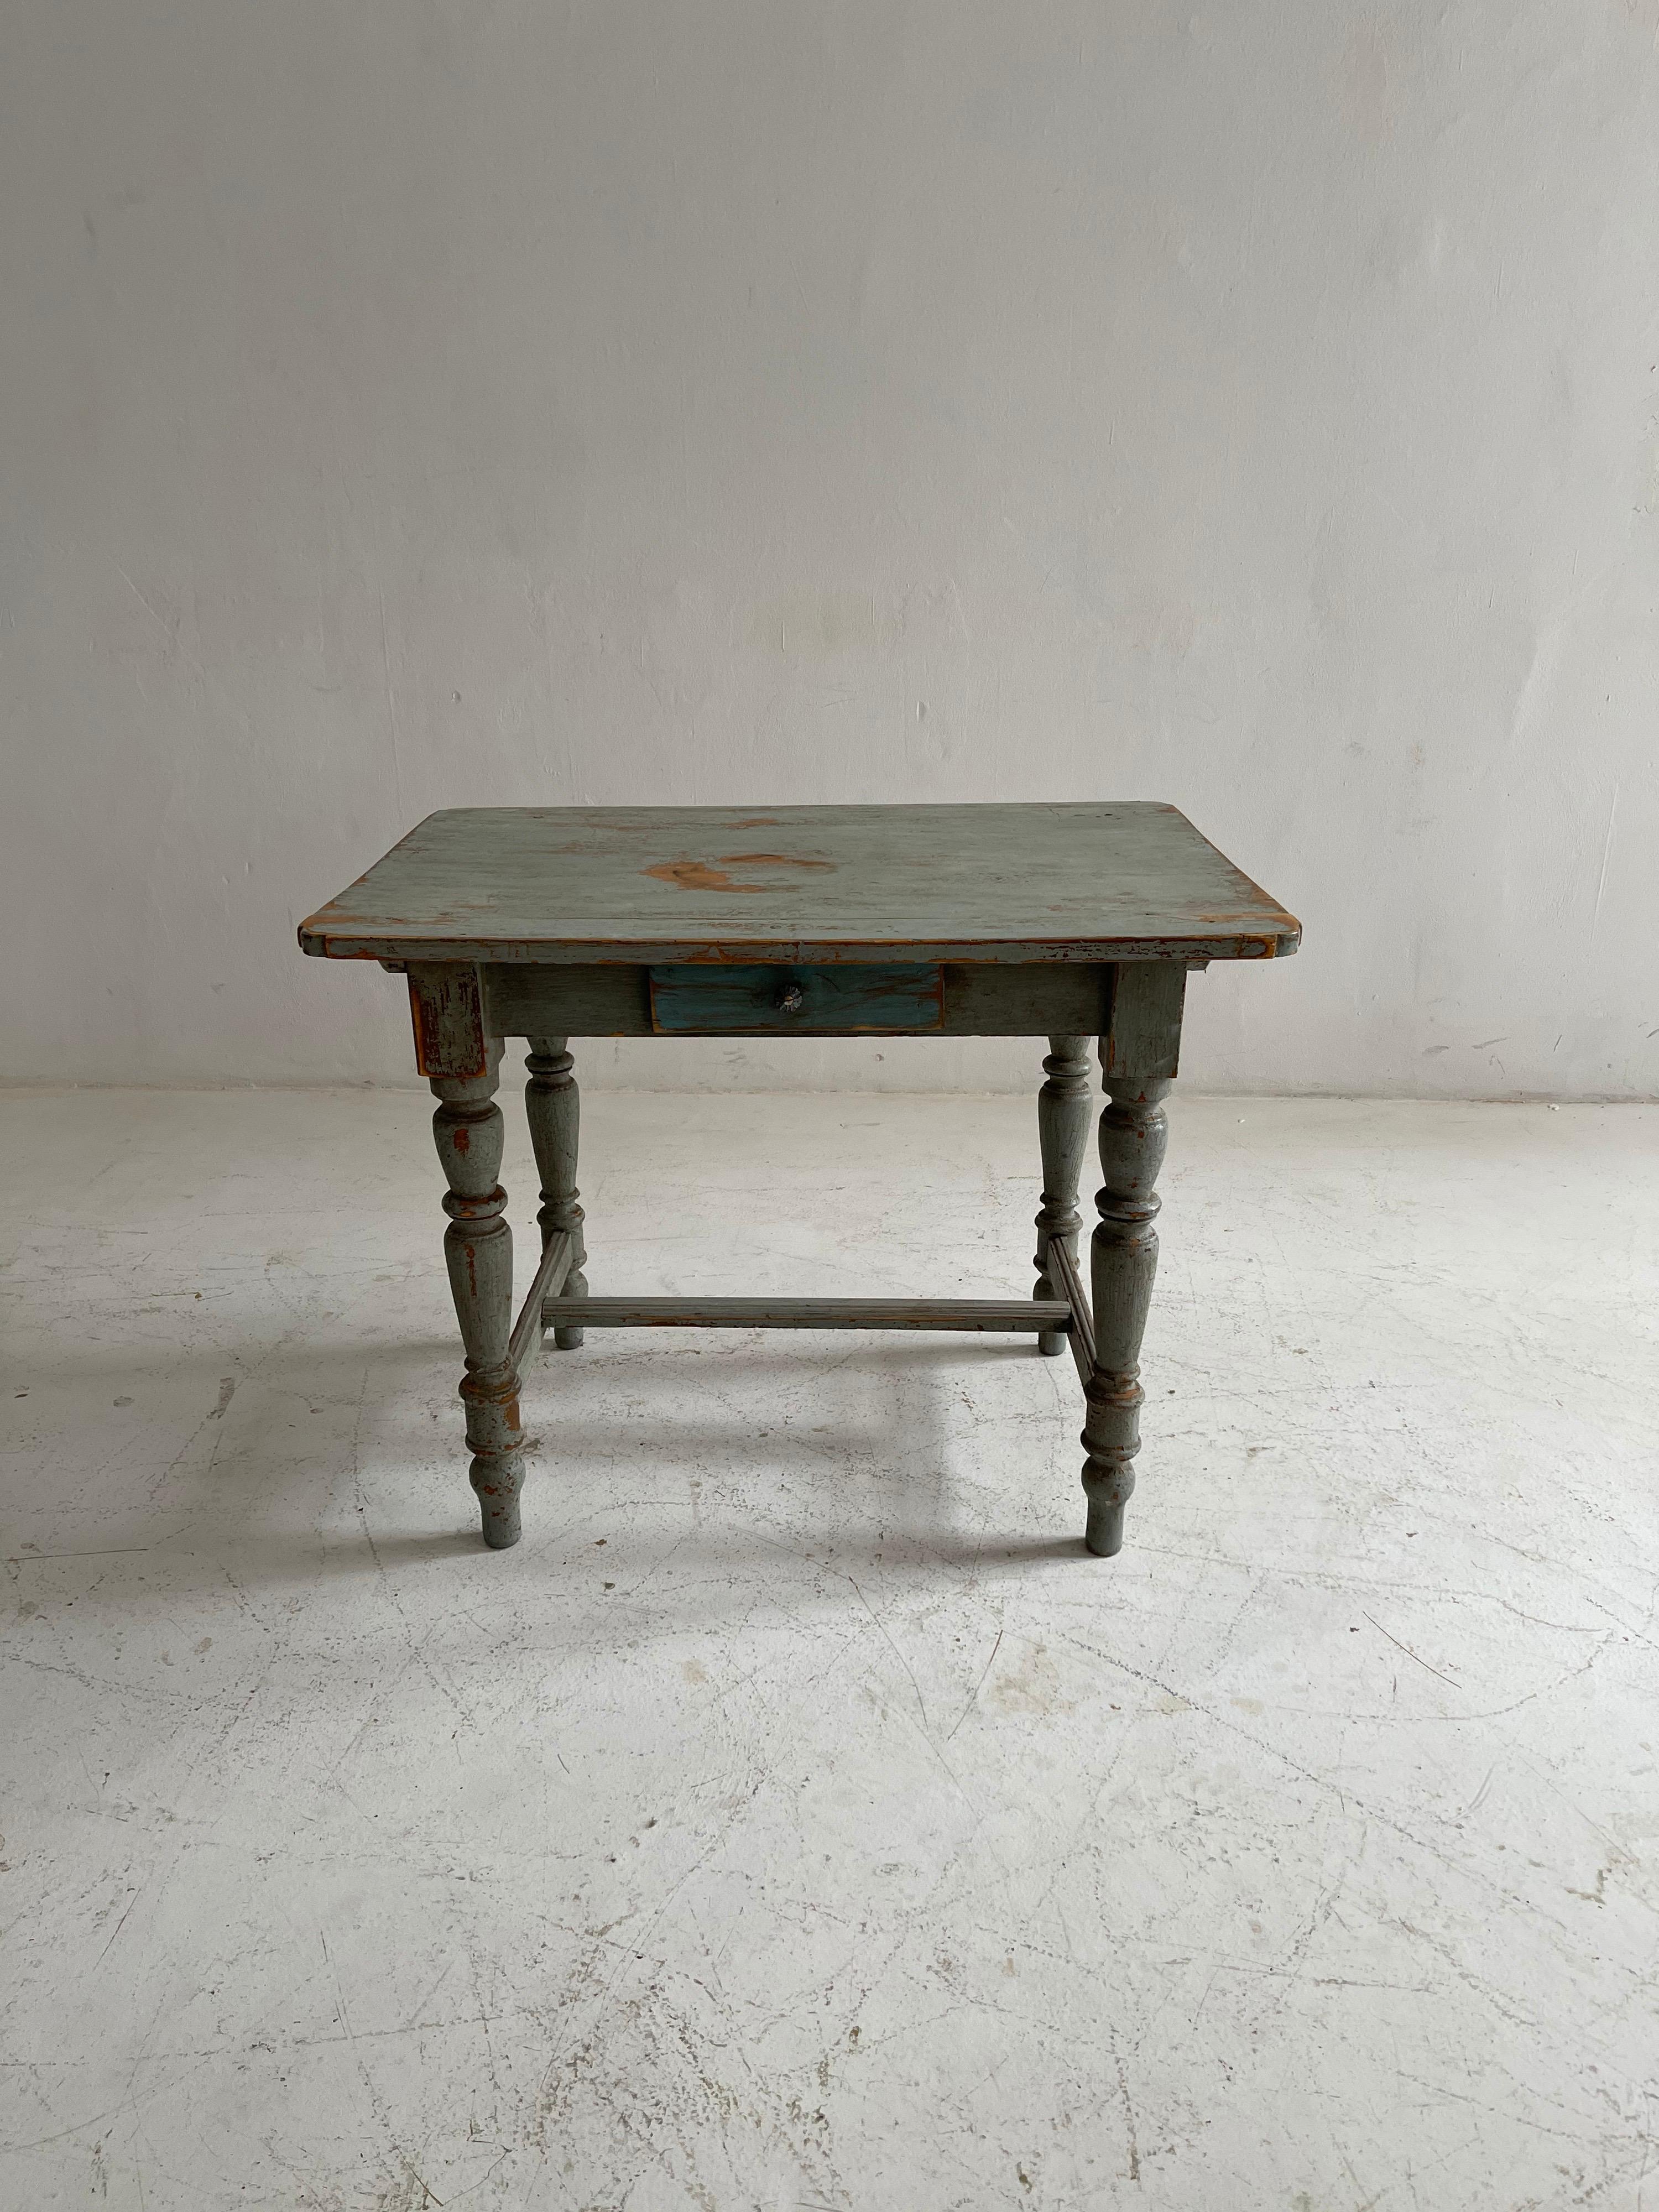 Patinated French country farm side table, French, 1920s.